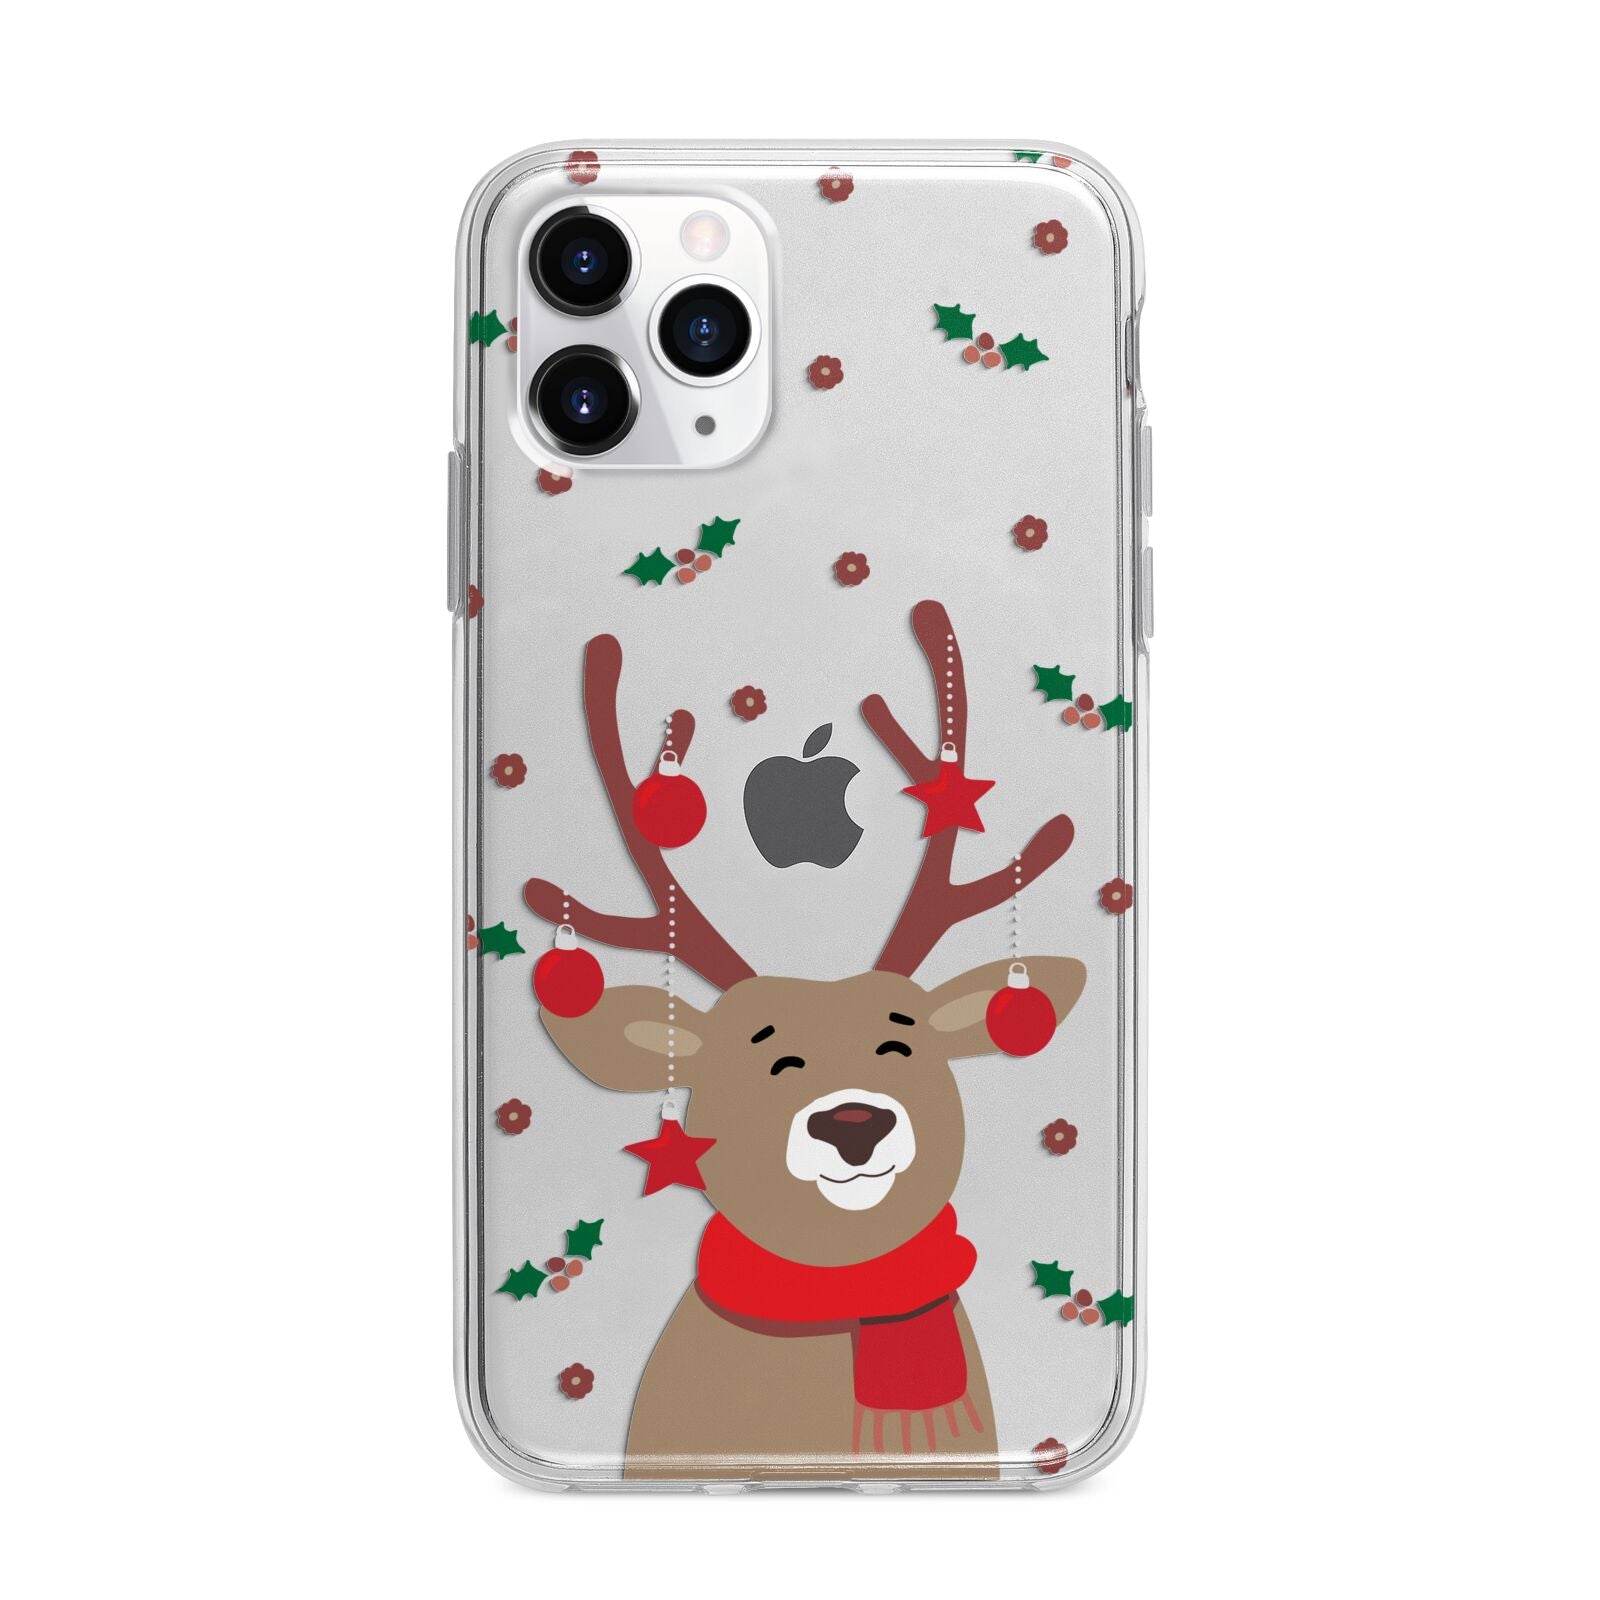 Reindeer Christmas Apple iPhone 11 Pro Max in Silver with Bumper Case